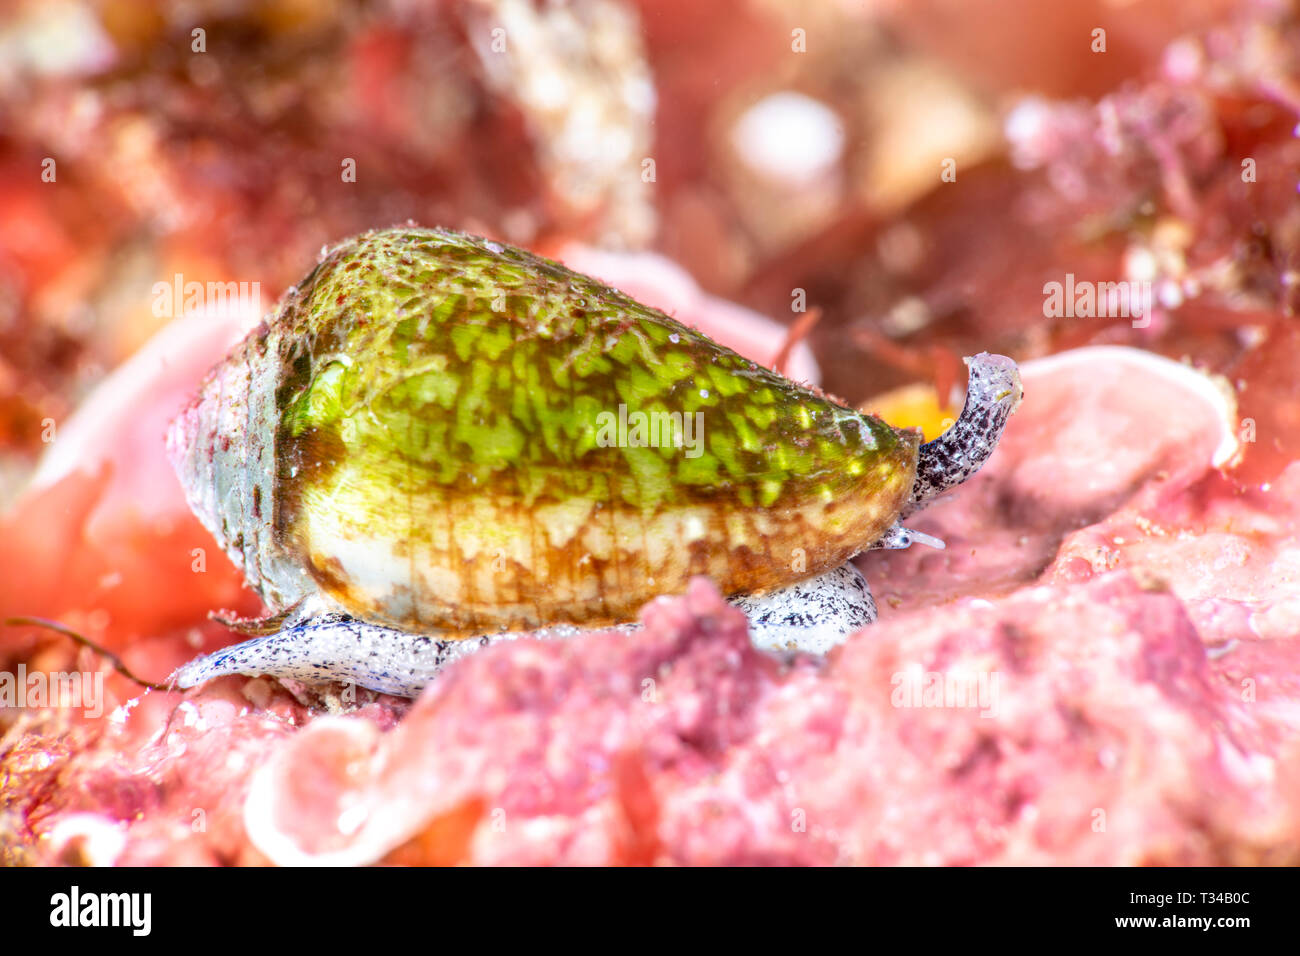 A super macro image of a tiny green cone snail shows its snout and eye as it makes its way across a reef. Stock Photo